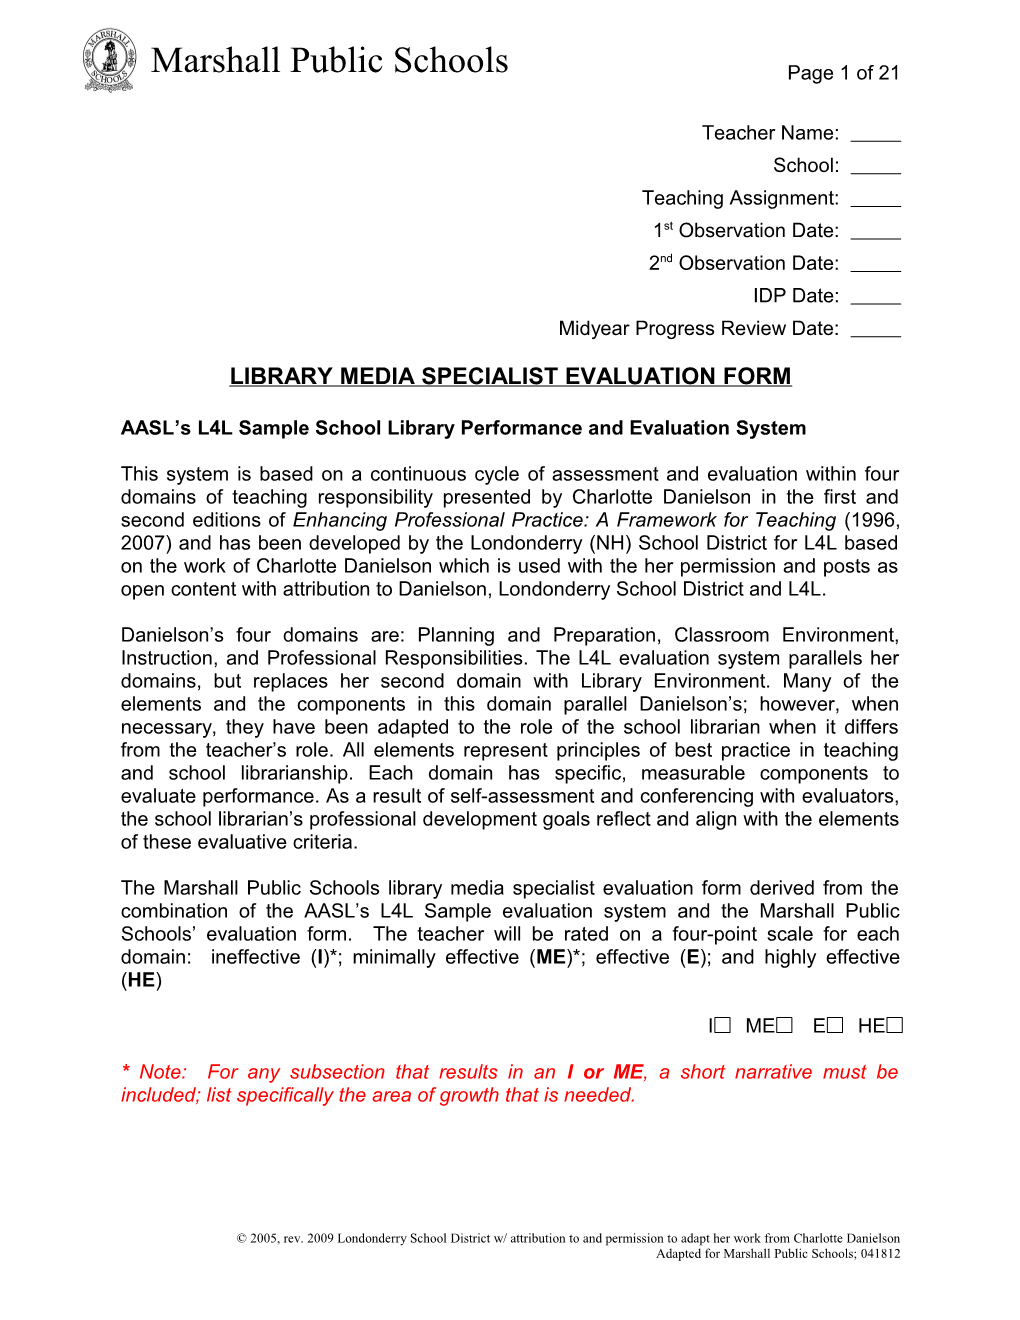 Library Media Specialist Evaluation Form